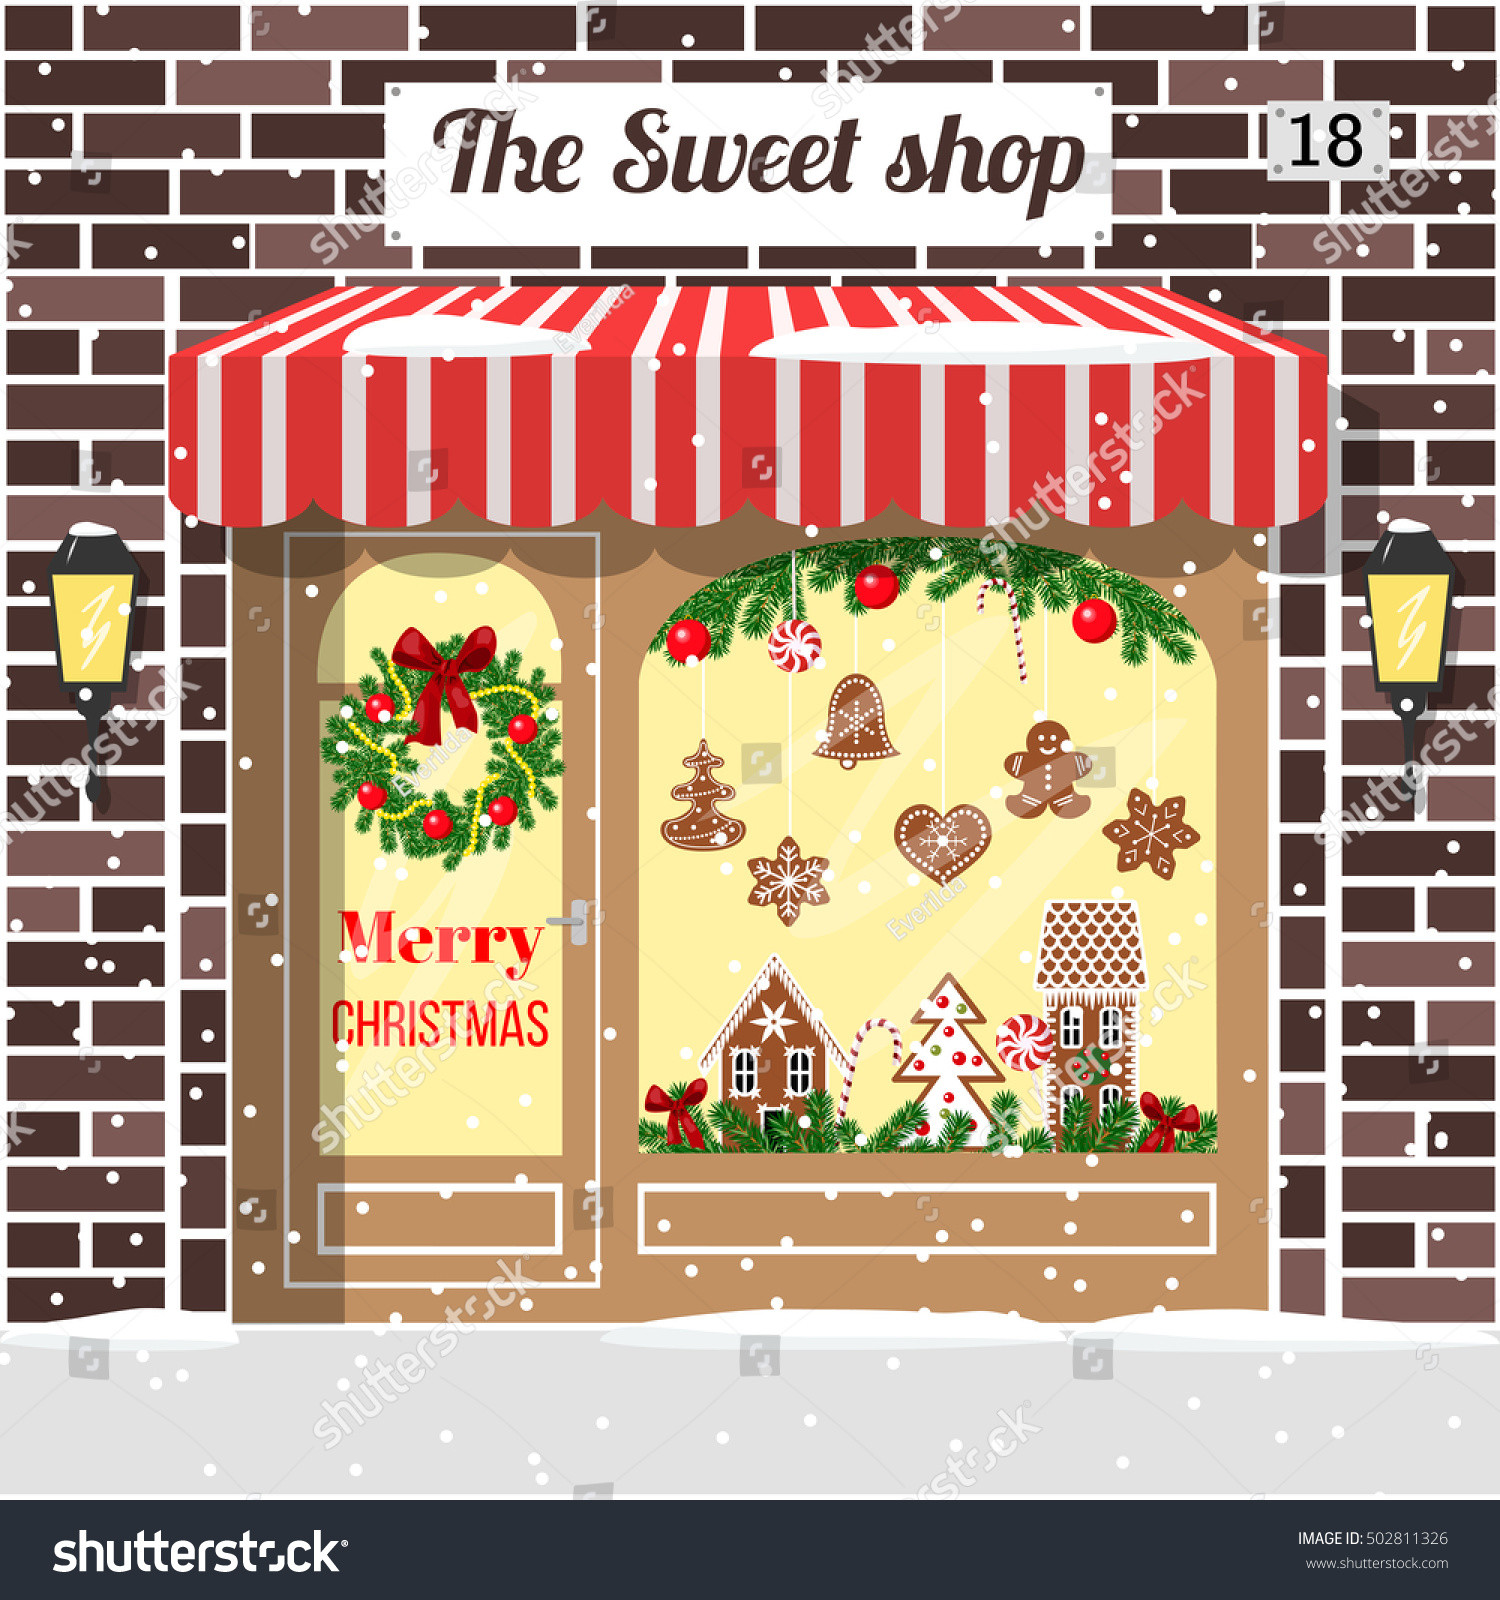 Christmas Candy Store
 Christmas Decorated Illuminated Sweet Shop Candy Stock